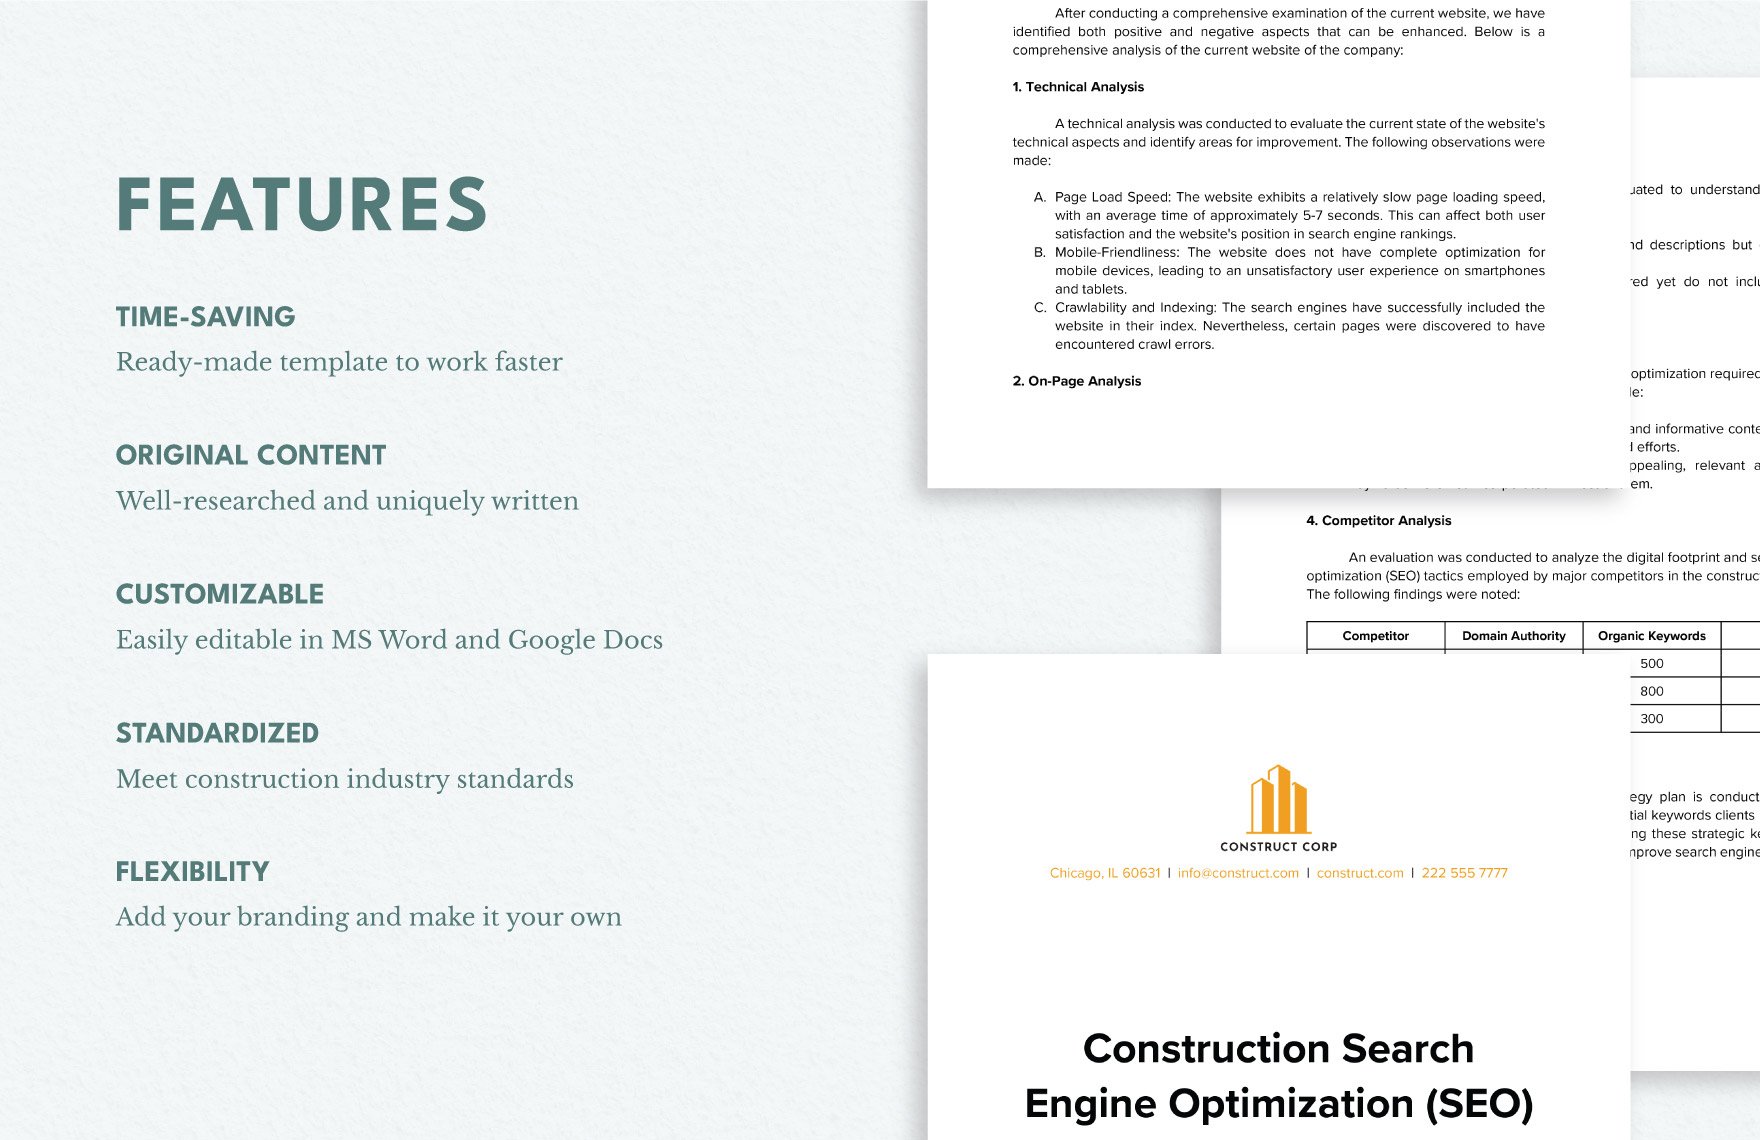 Construction Search Engine Optimization (SEO) Strategy Plan Template